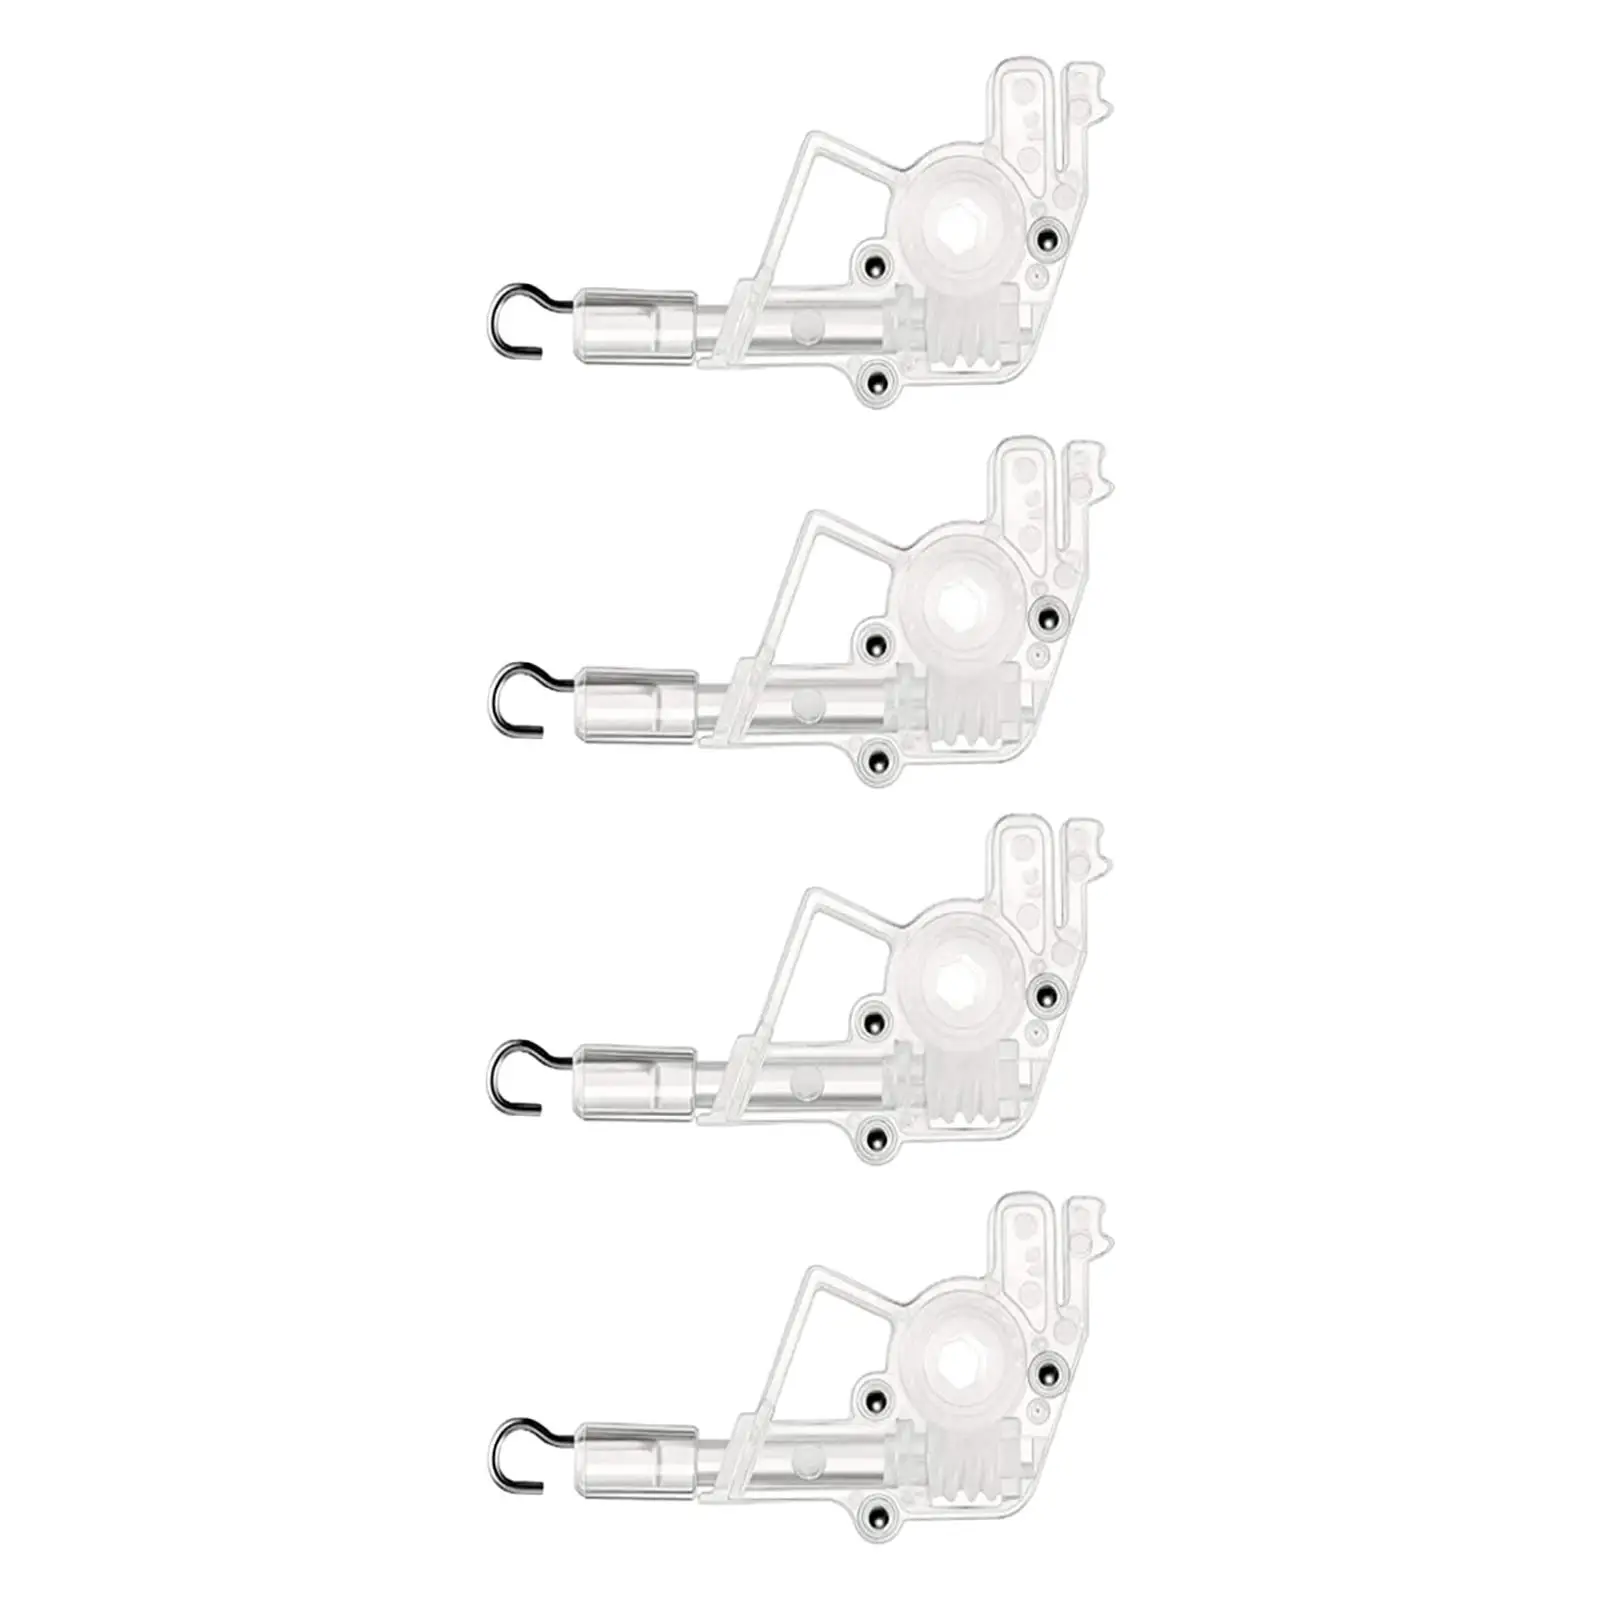 4 Pieces Blind Tilter Clear Low Rail Wand Tilter for Office, Bedroom, Home,